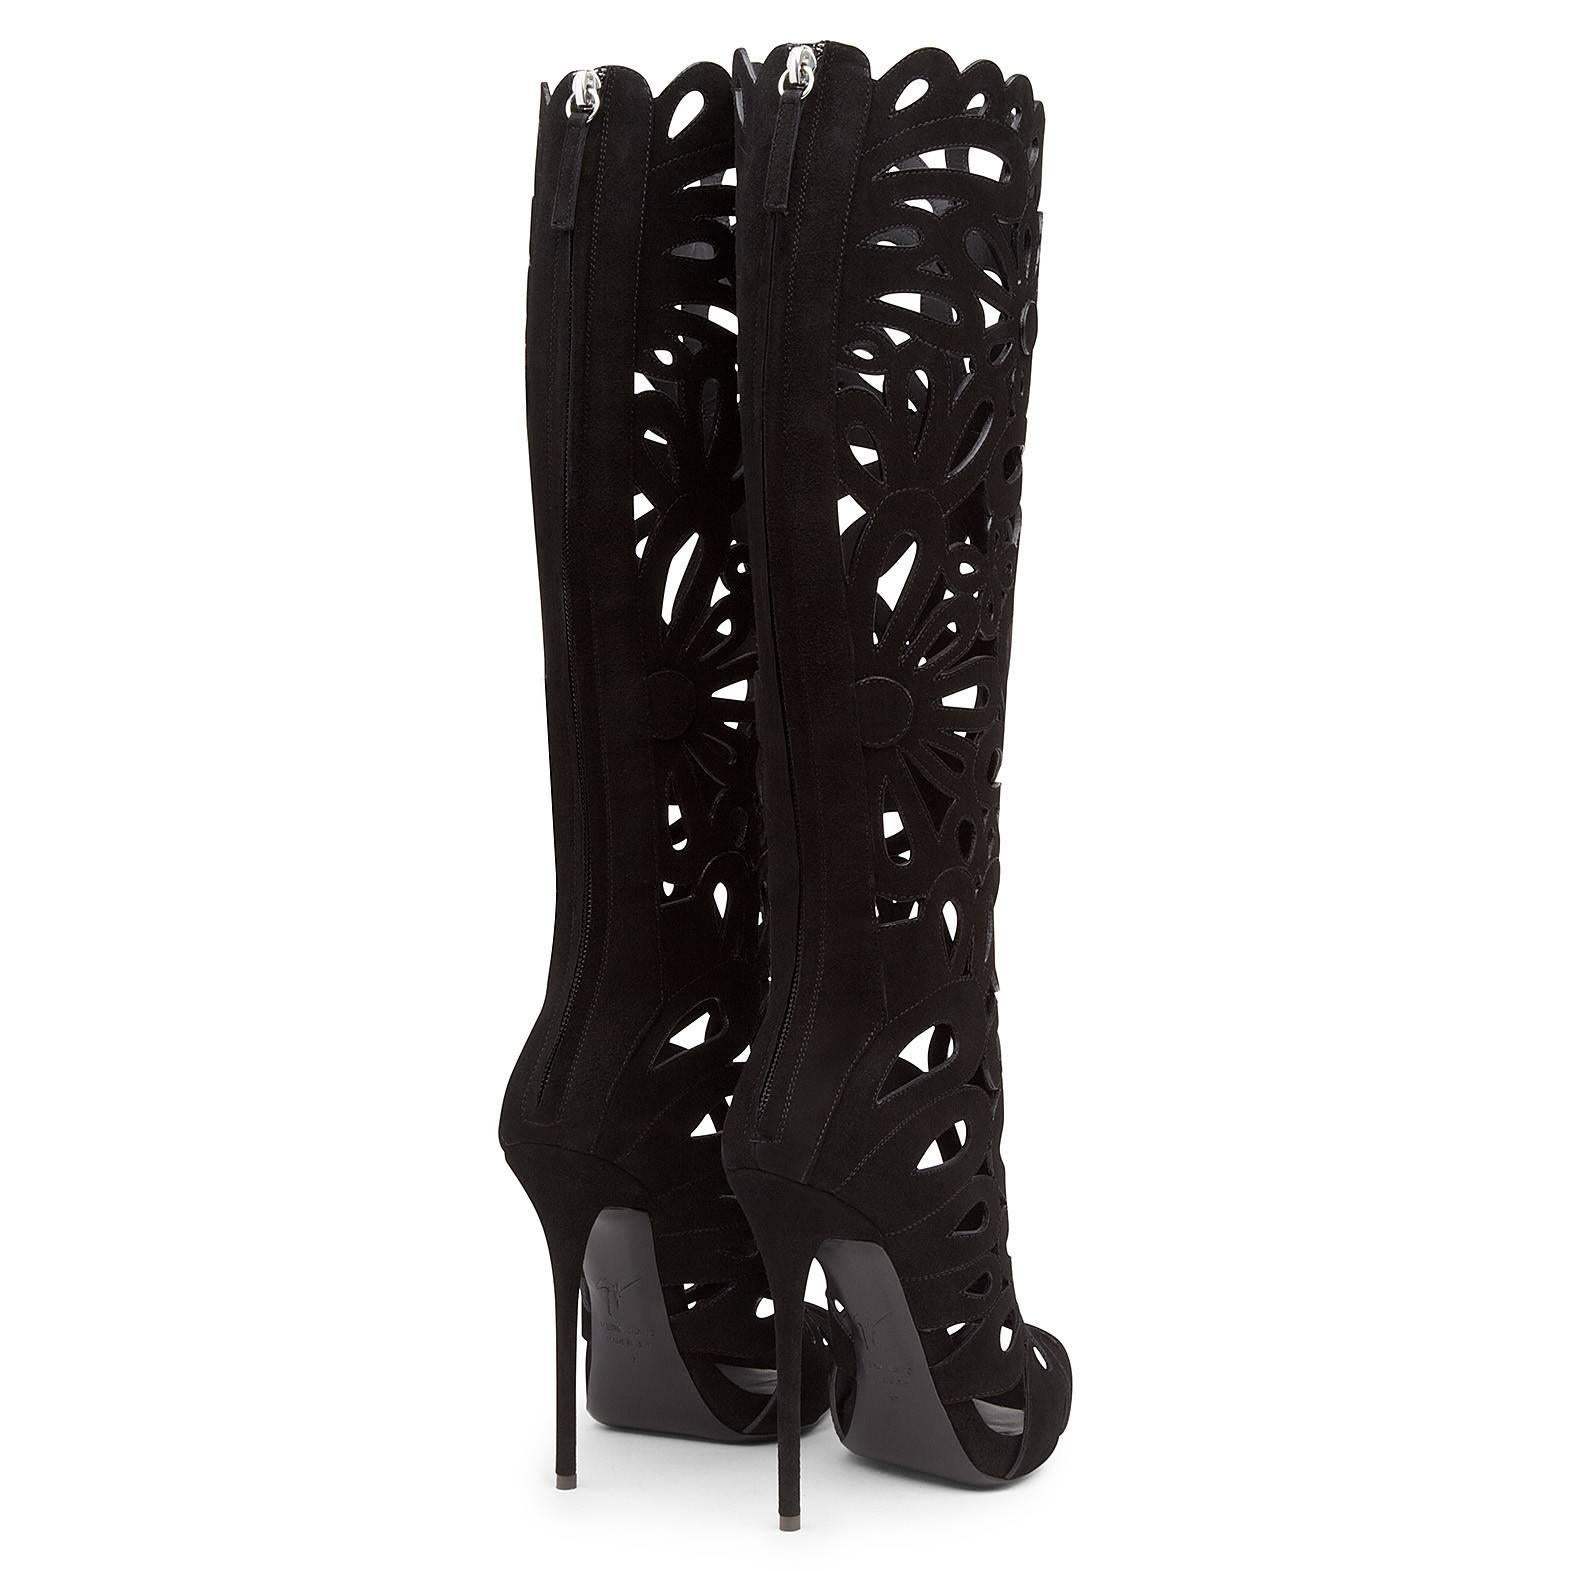 Giuseppe Zanotti New Sold Out Black Suede Lattice Cut Out Heels Boots in Box 1